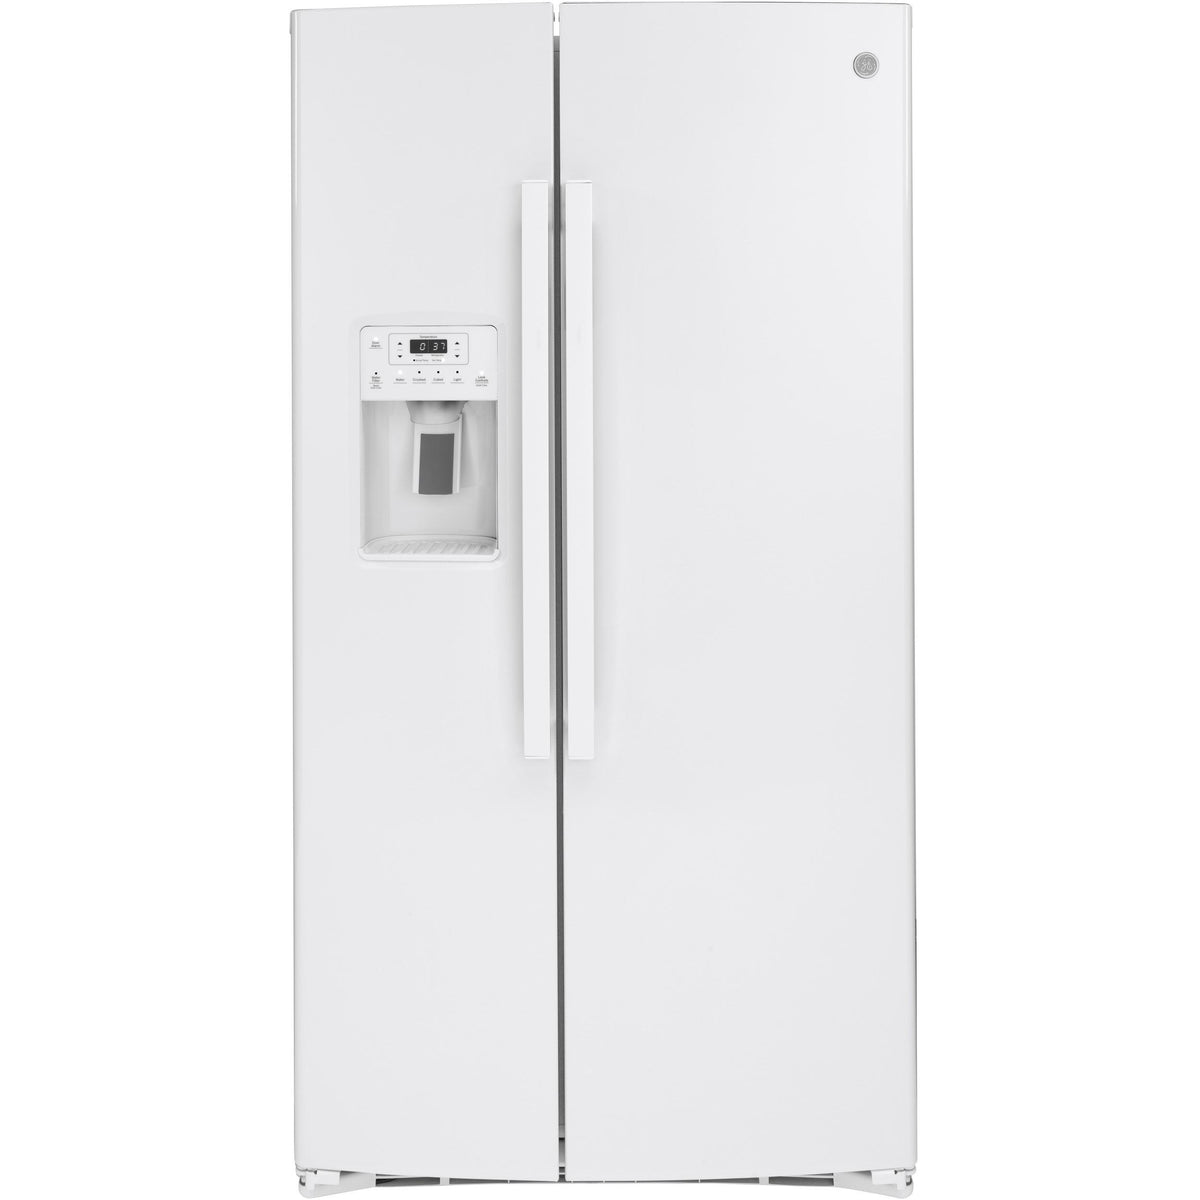 36-inch, 25.1 cu.ft. Freestanding Side-by-Side Refrigerator with Water and Ice Dispensing System GSS25IGNWW IMAGE 1